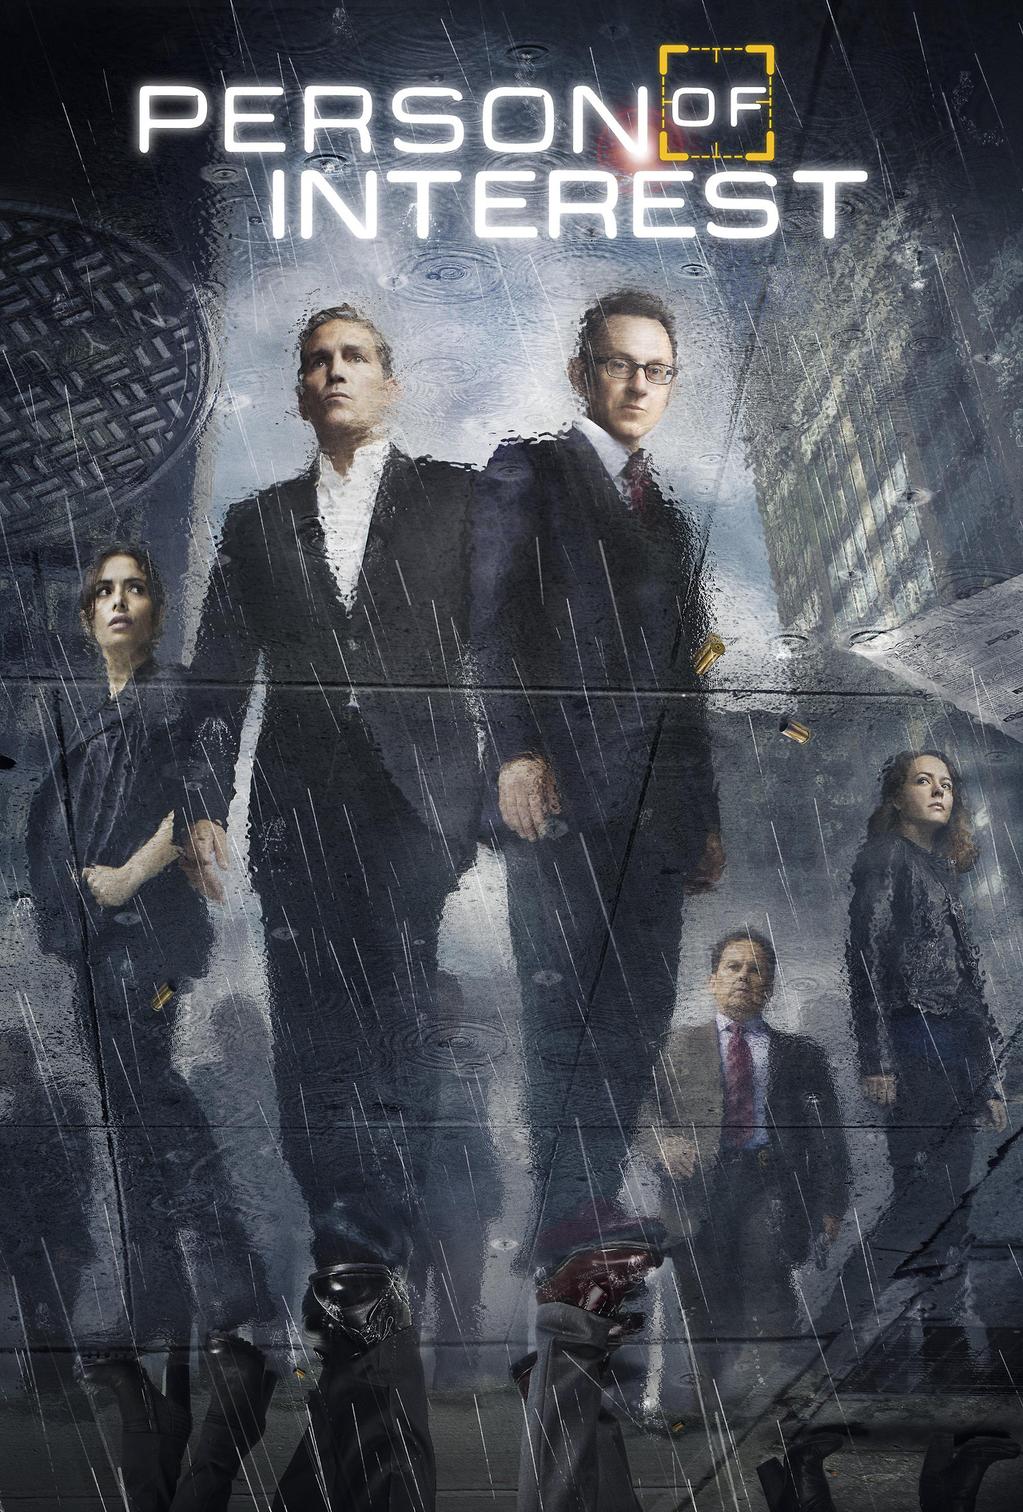 Person Of Interest Backgrounds, Compatible - PC, Mobile, Gadgets| 1023x1512 px